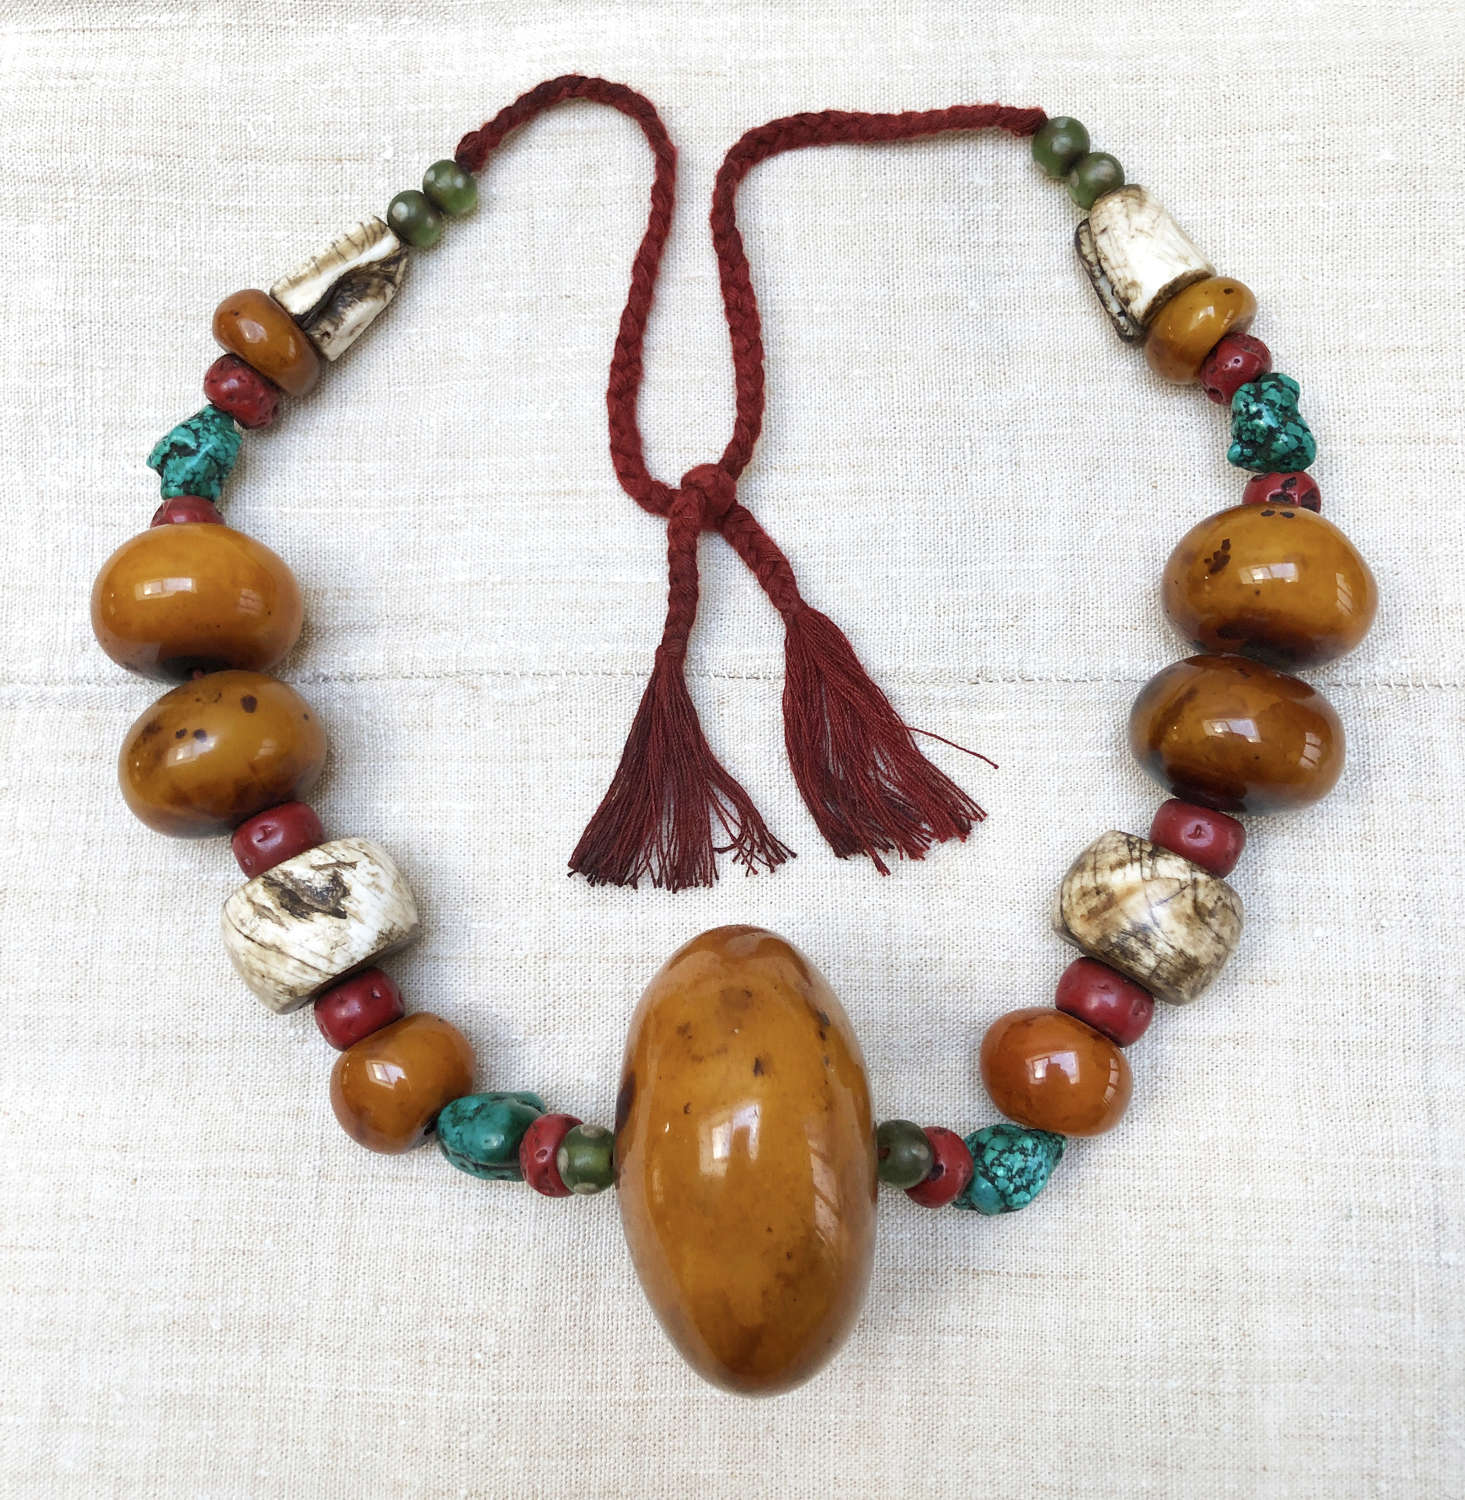 Nepalese Amber, Turquoise and Coral Necklace - c 1880